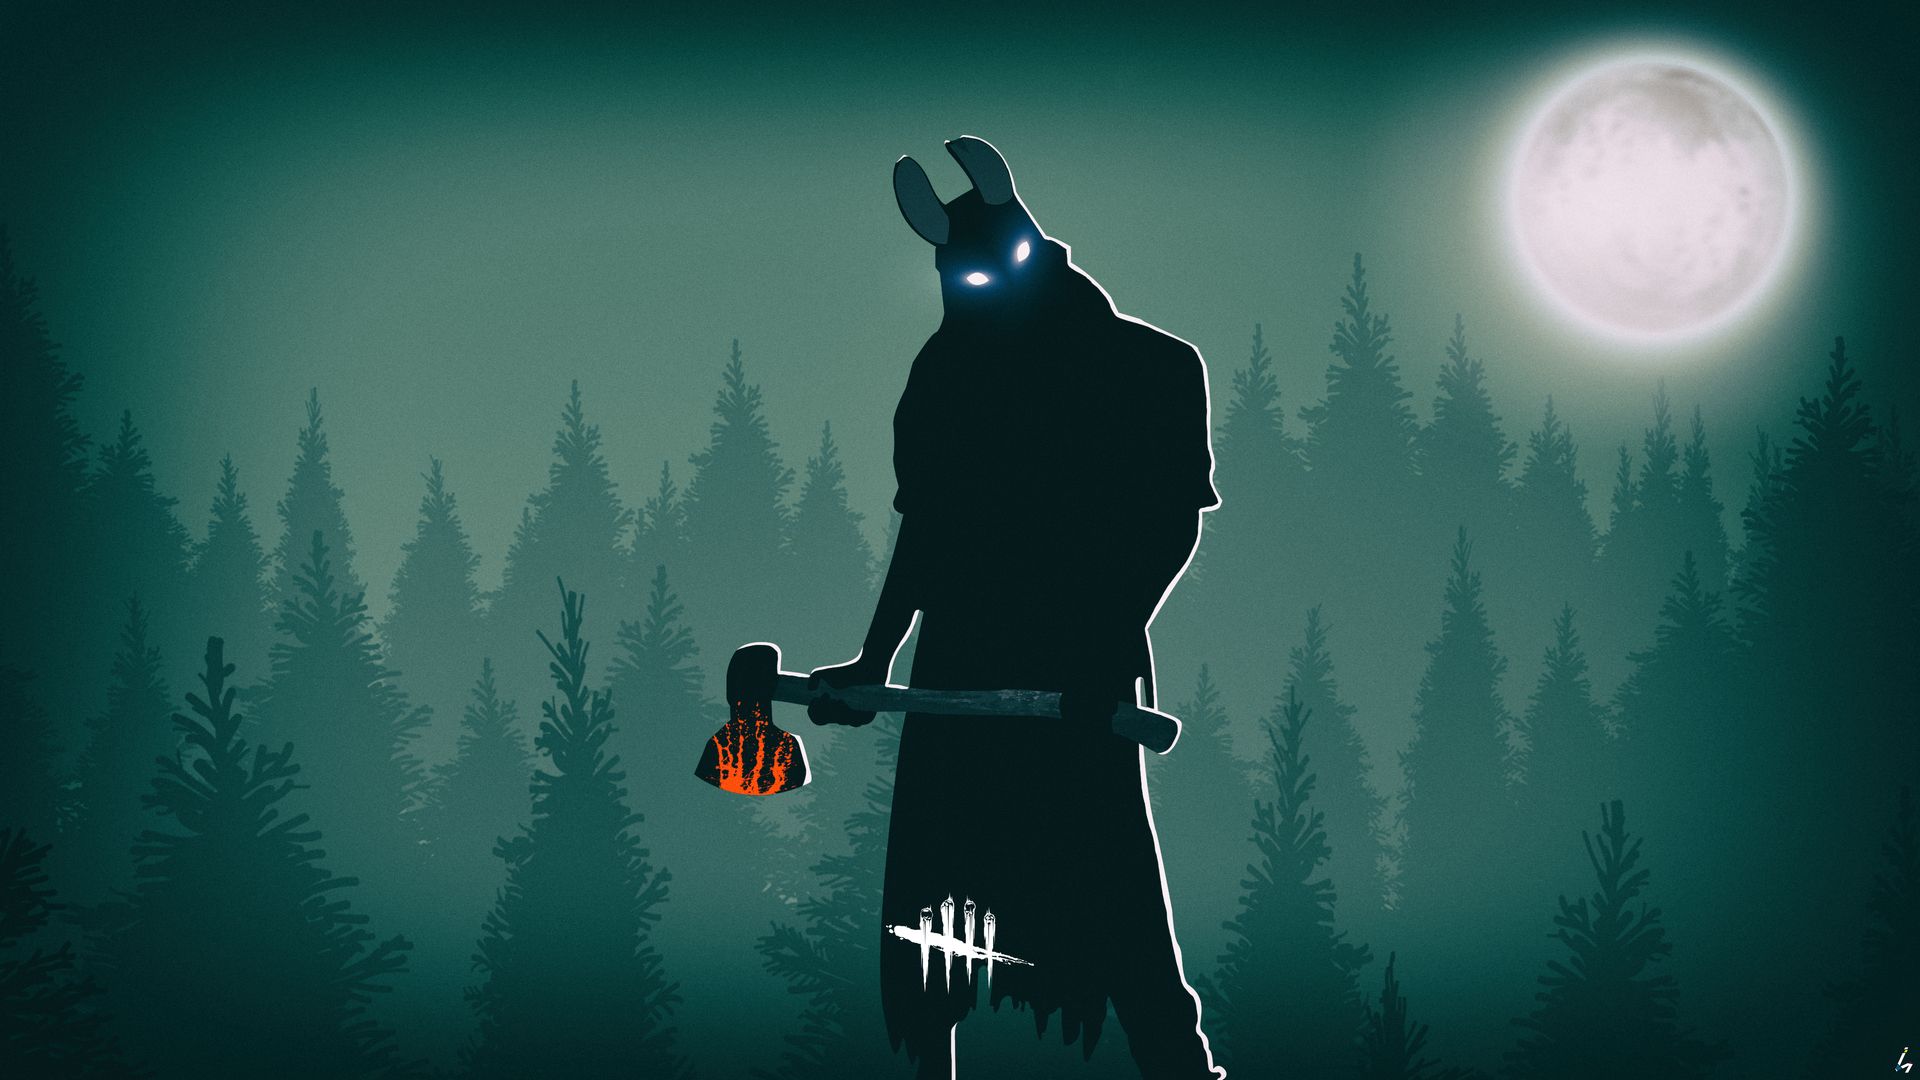 The Wraith Dead By Daylight Wallpapers